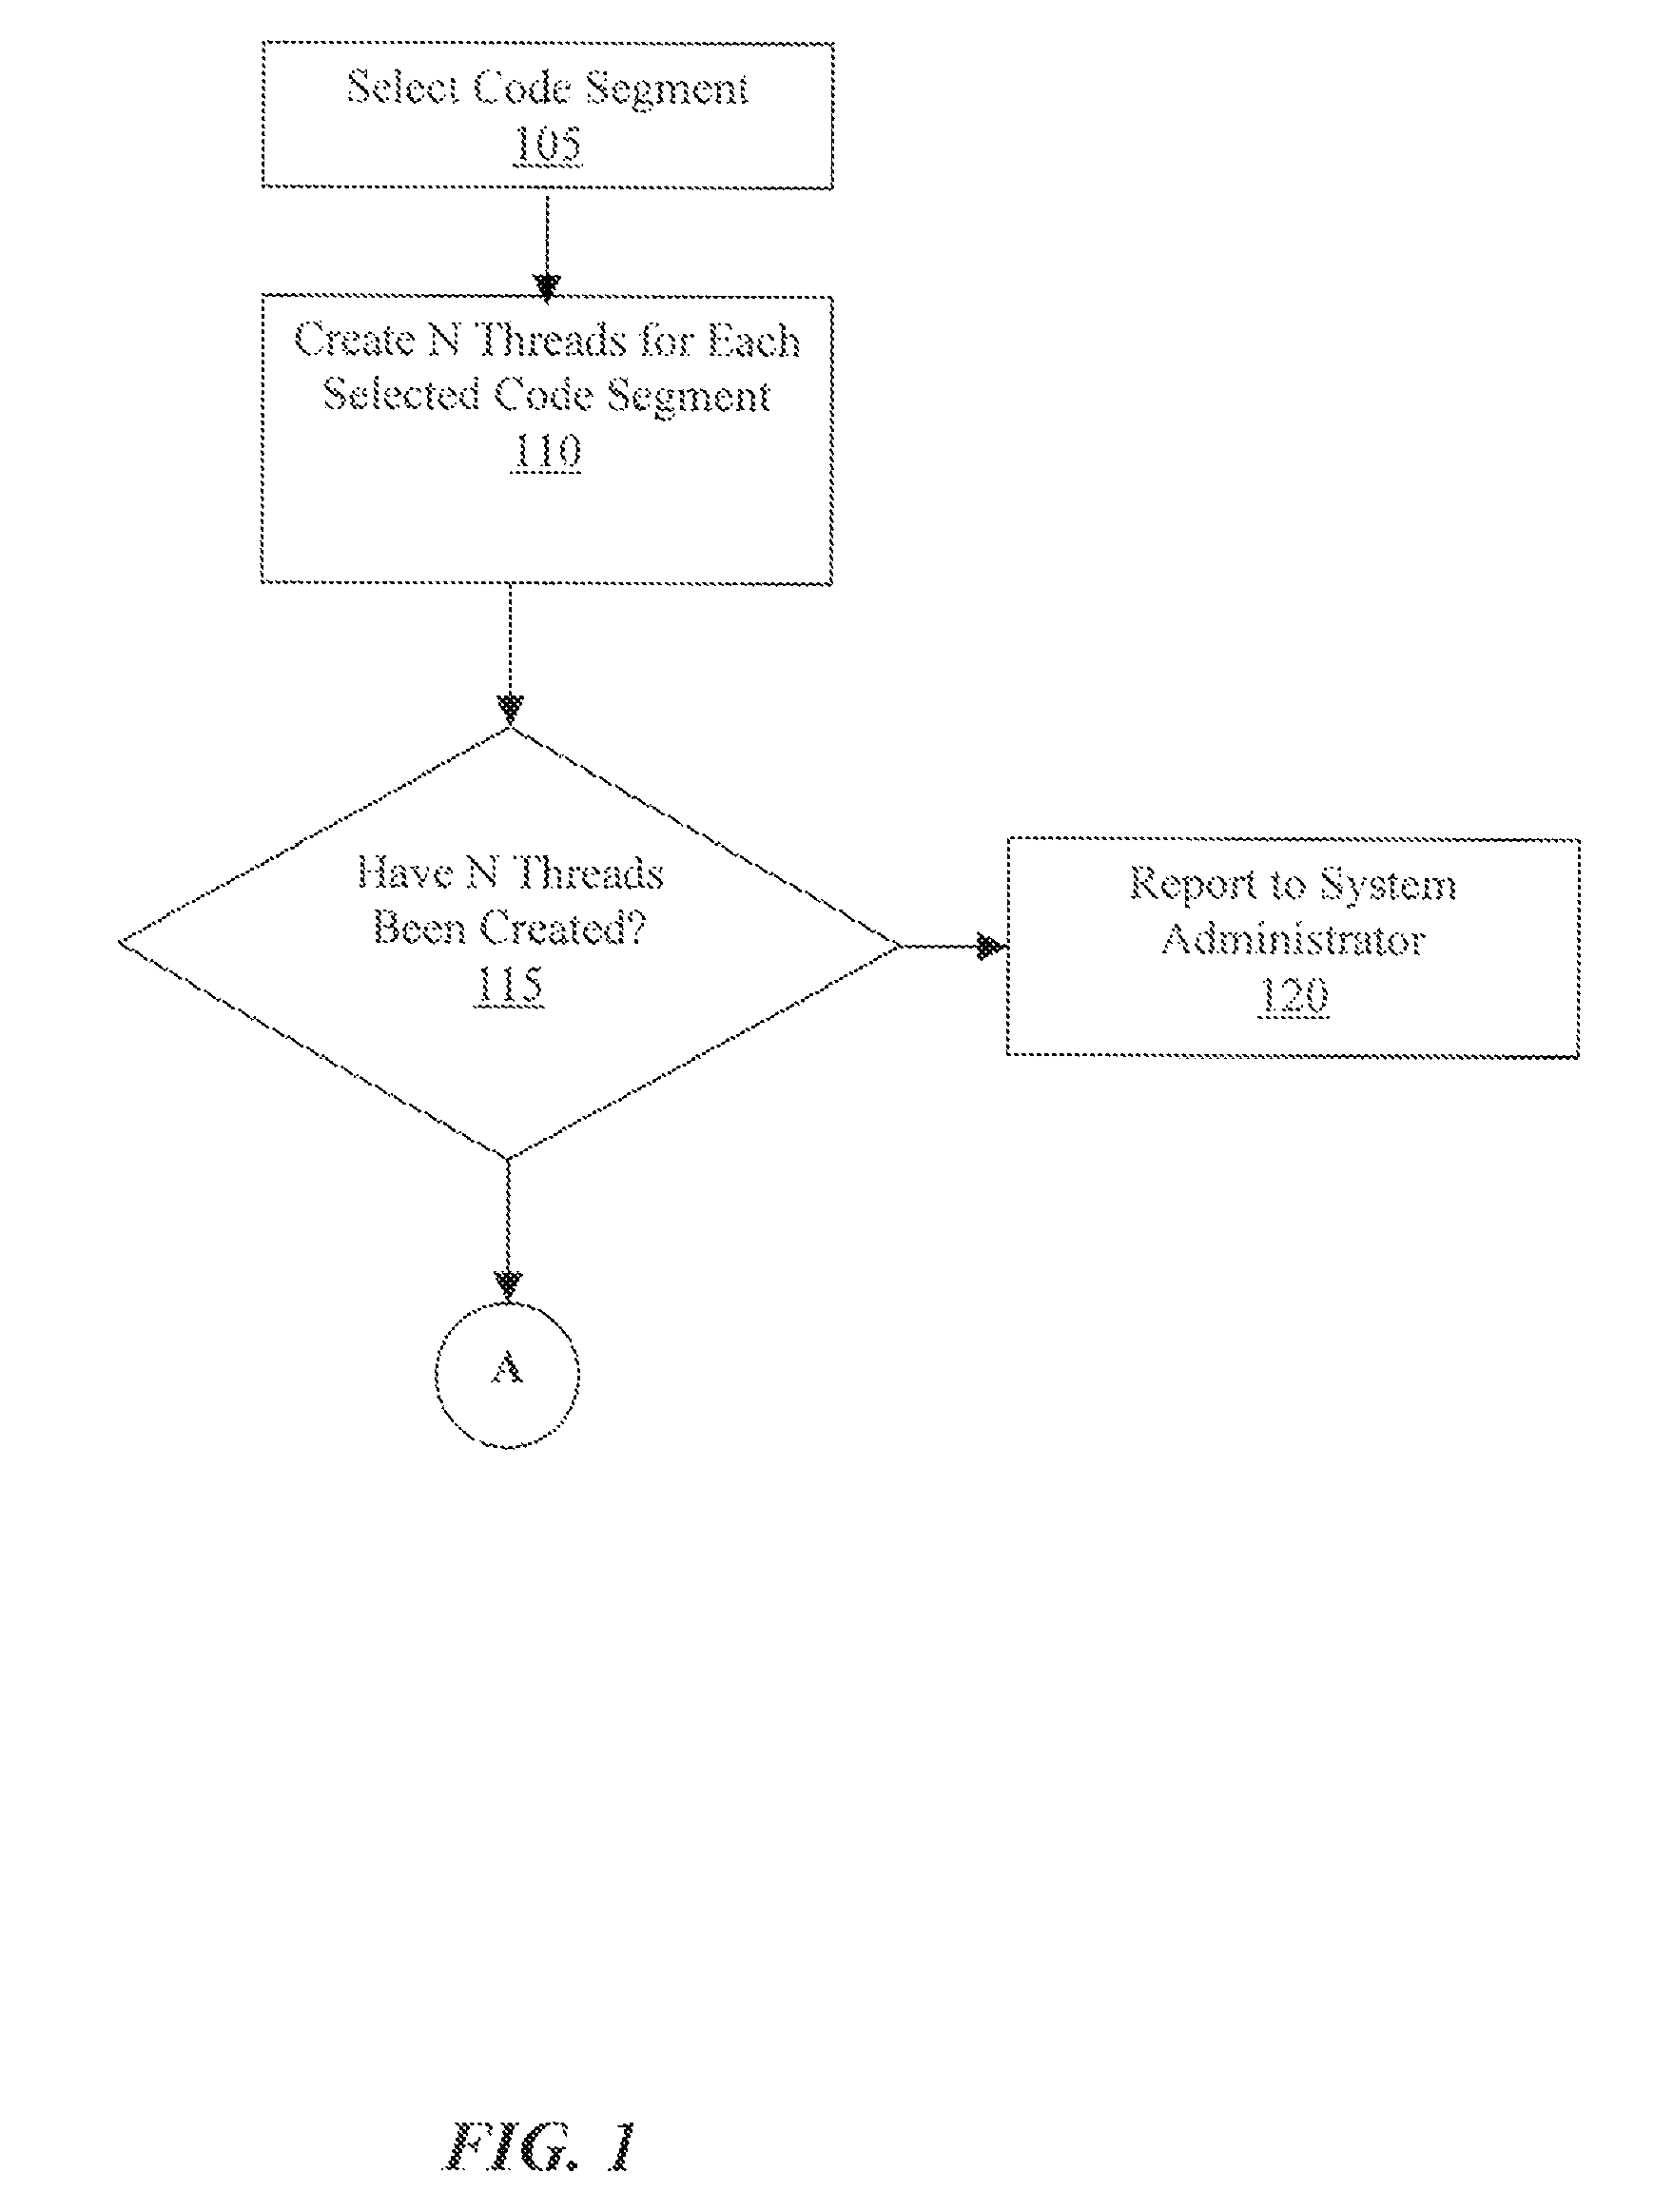 Method to examine the execution and performance of parallel threads in parallel programming